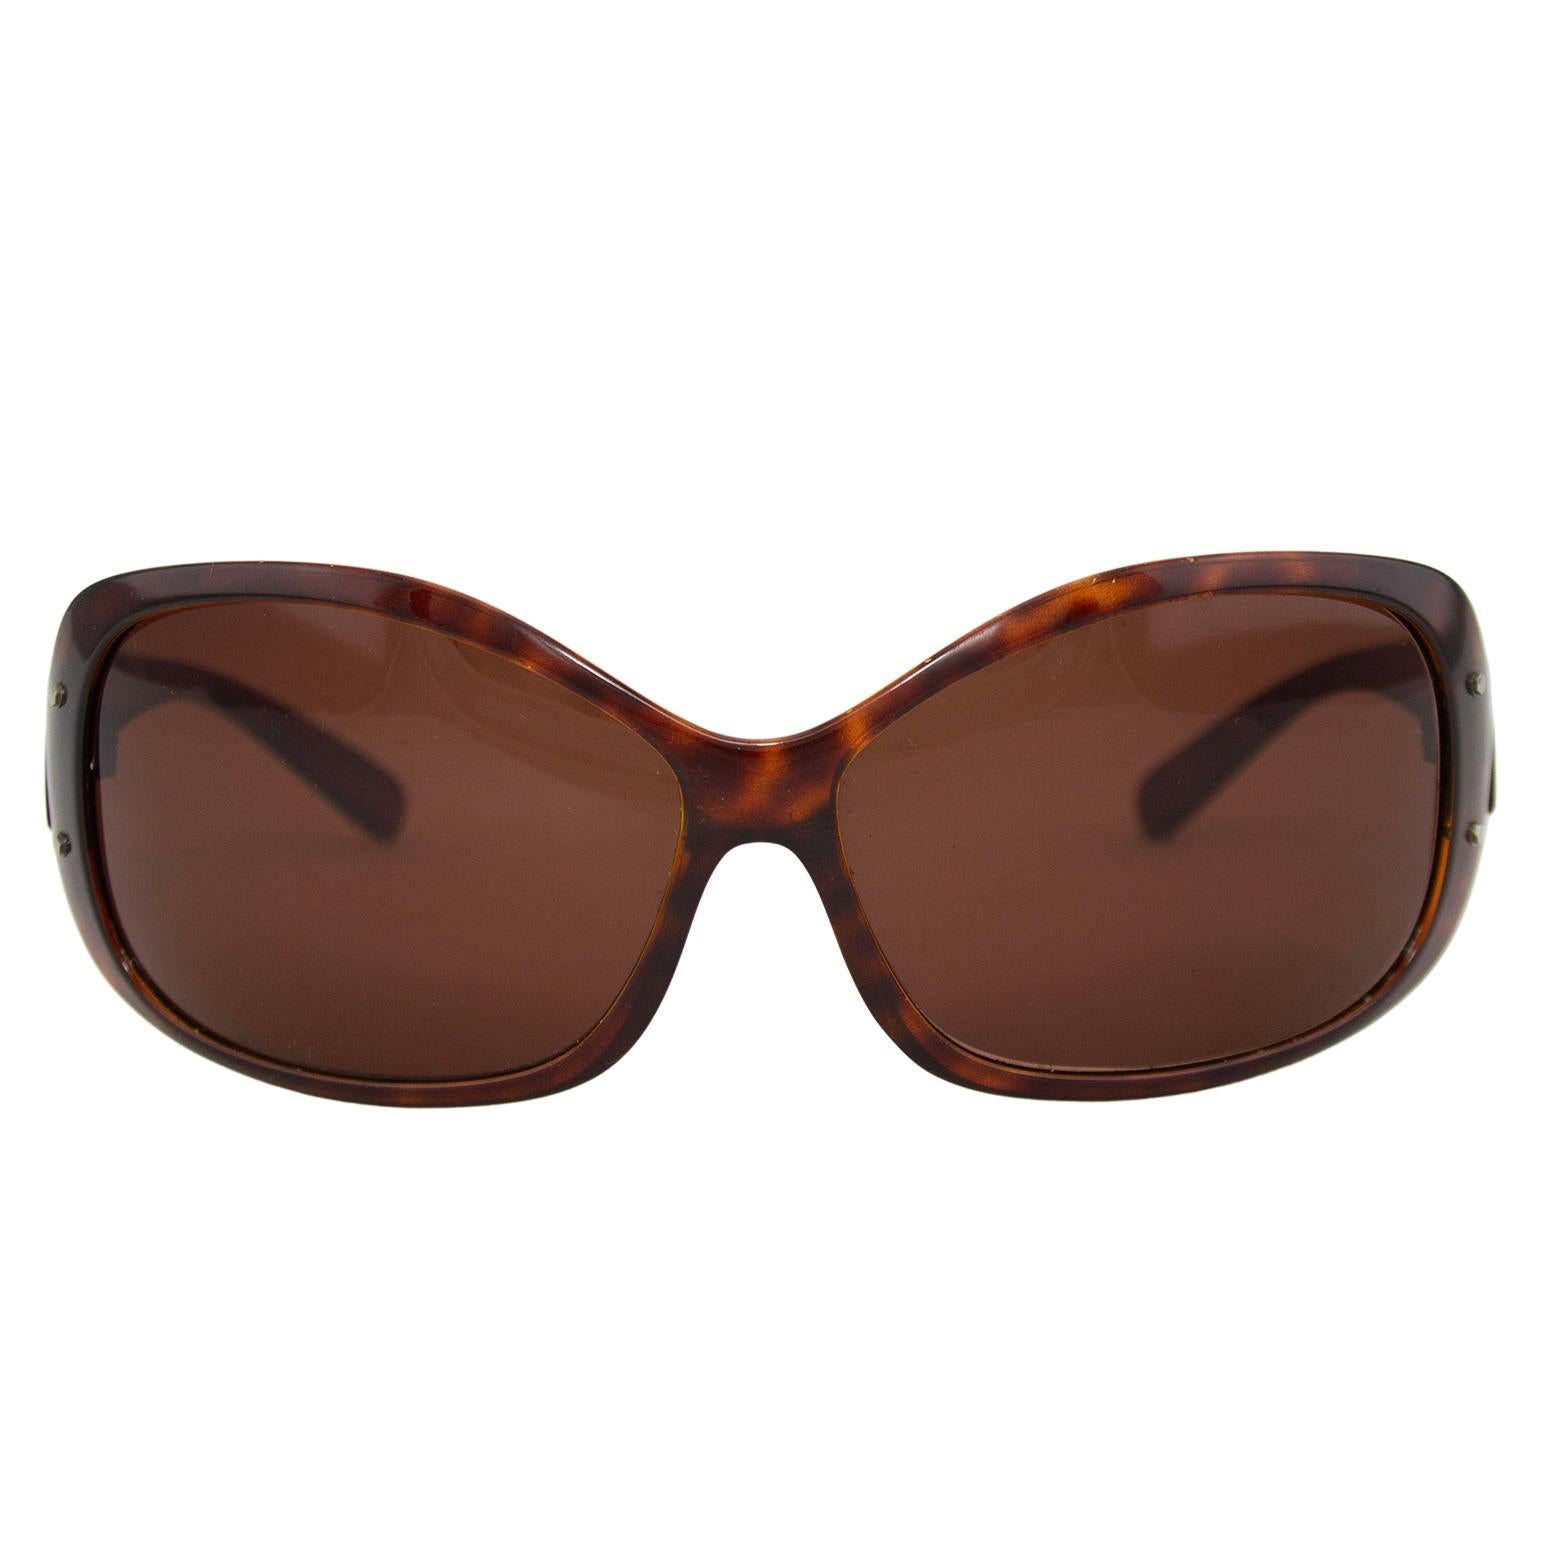 Prada sunglasses from the mid 2000s. Brown tortoiseshell with brown lenses. Slight wrap around style. Prada markings on exterior of arms and interior style information markings. Excellent vintage condition - very light surface wear to lenses, no